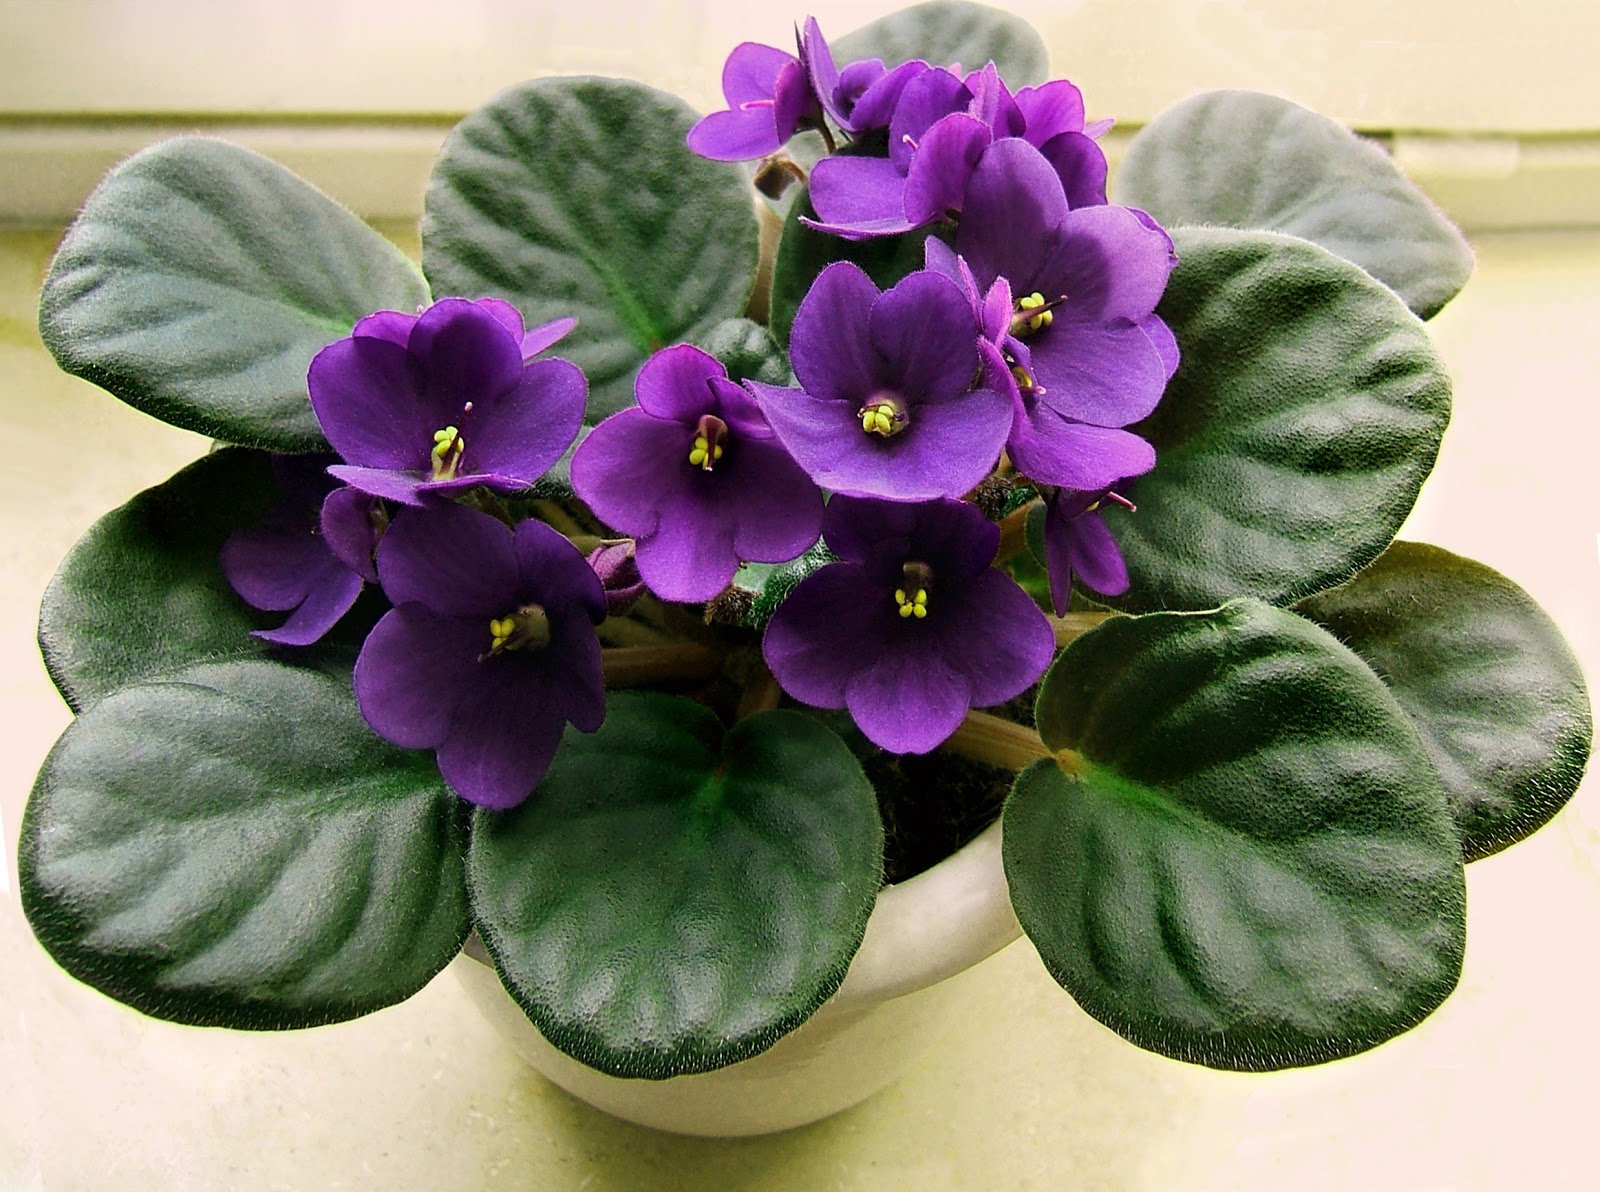 African Violets: How to Care for African Violets | The Old Farmer's Almanac